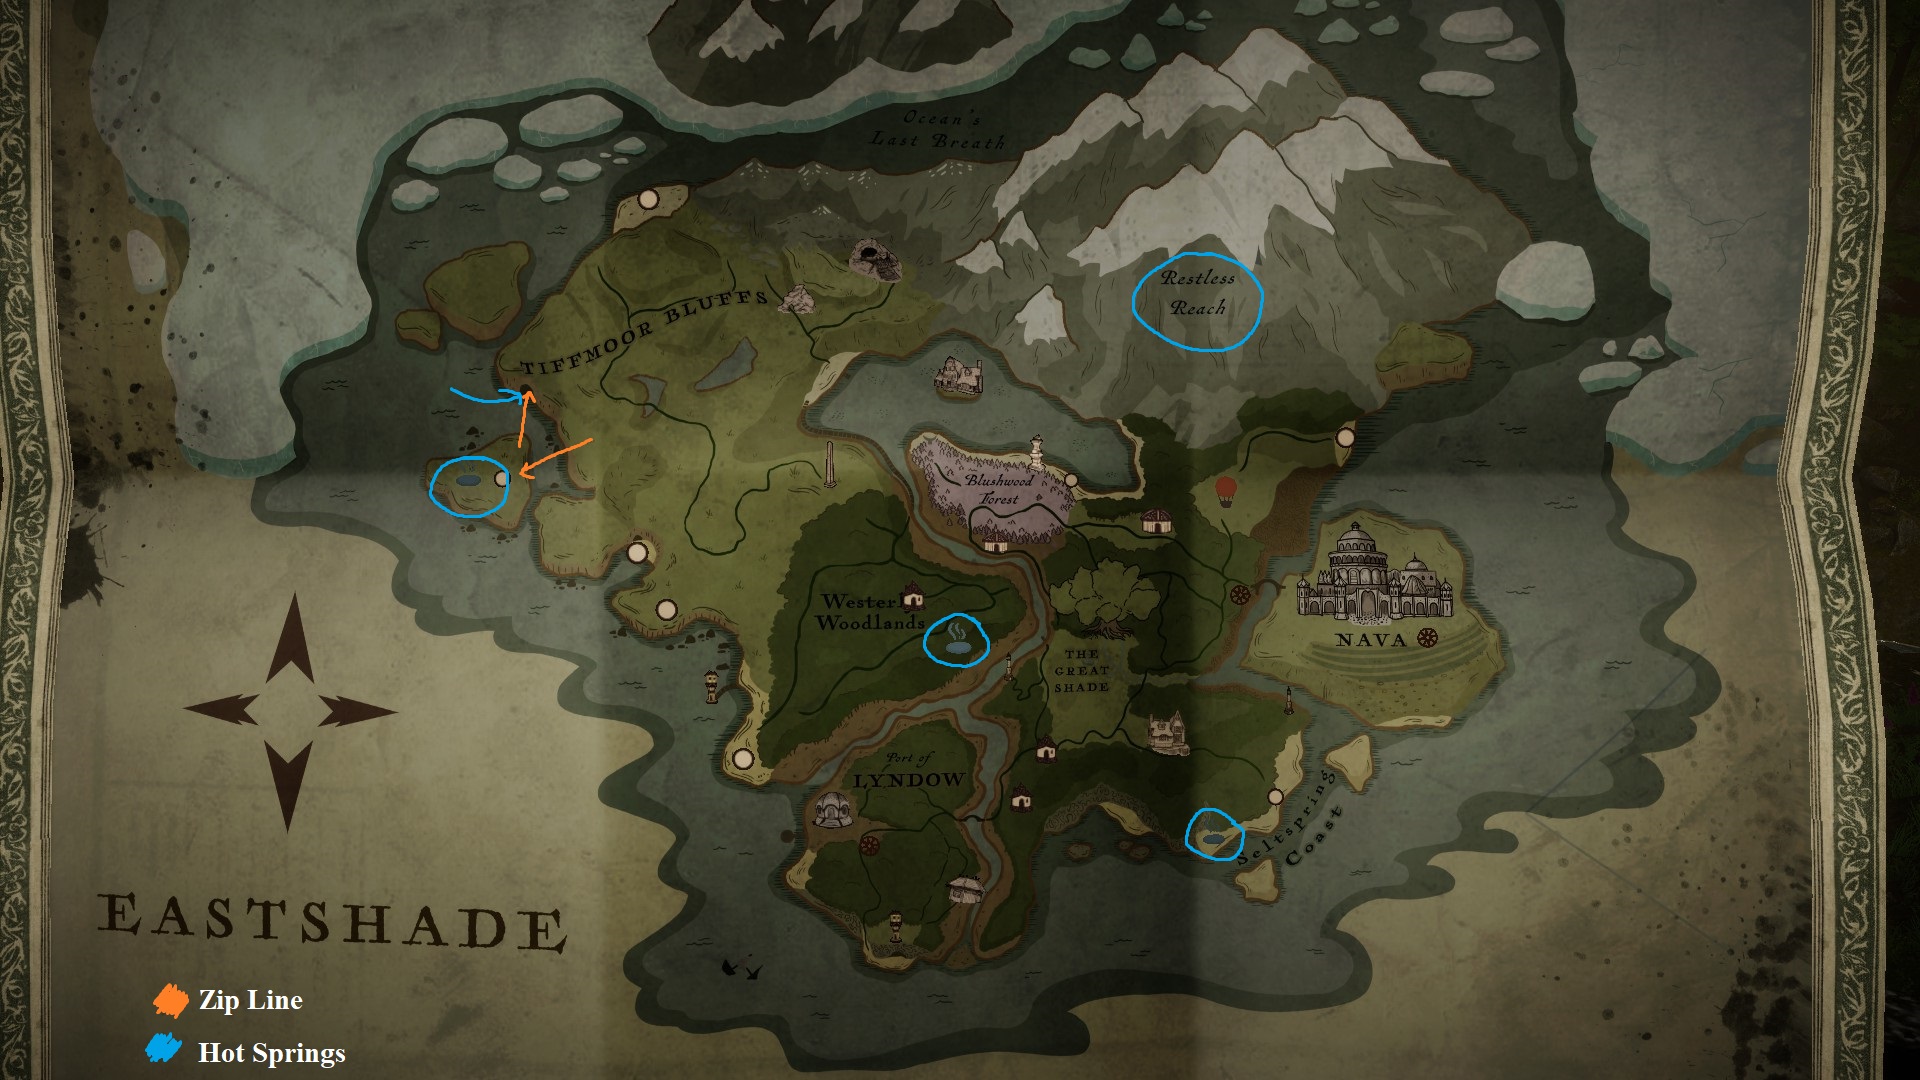 Eastshade How to Complete All Quest + Walkthrough Guide - 2021